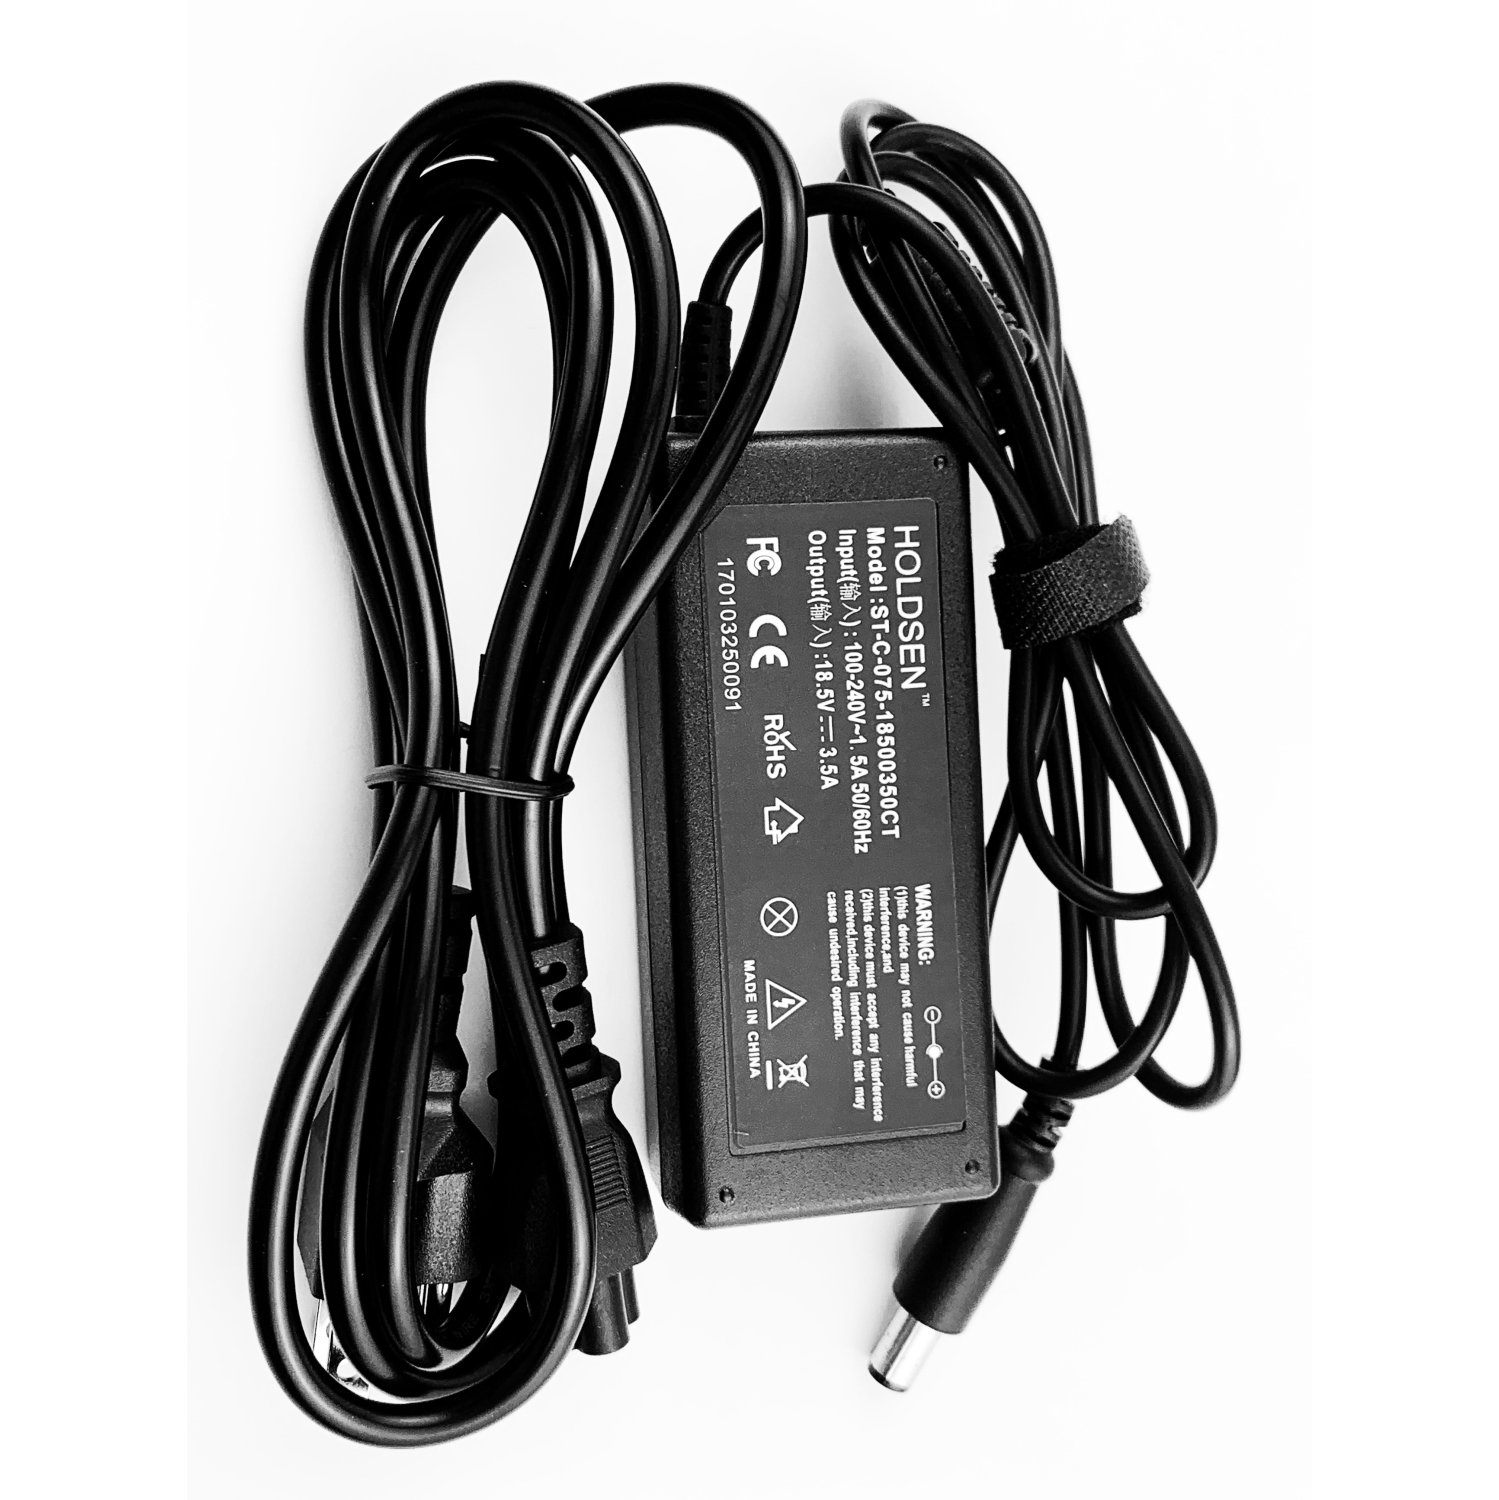 3.5A 65W AC adapter power charger for HP Pavilion G7-1174 G6-1017tu G6-1170ew